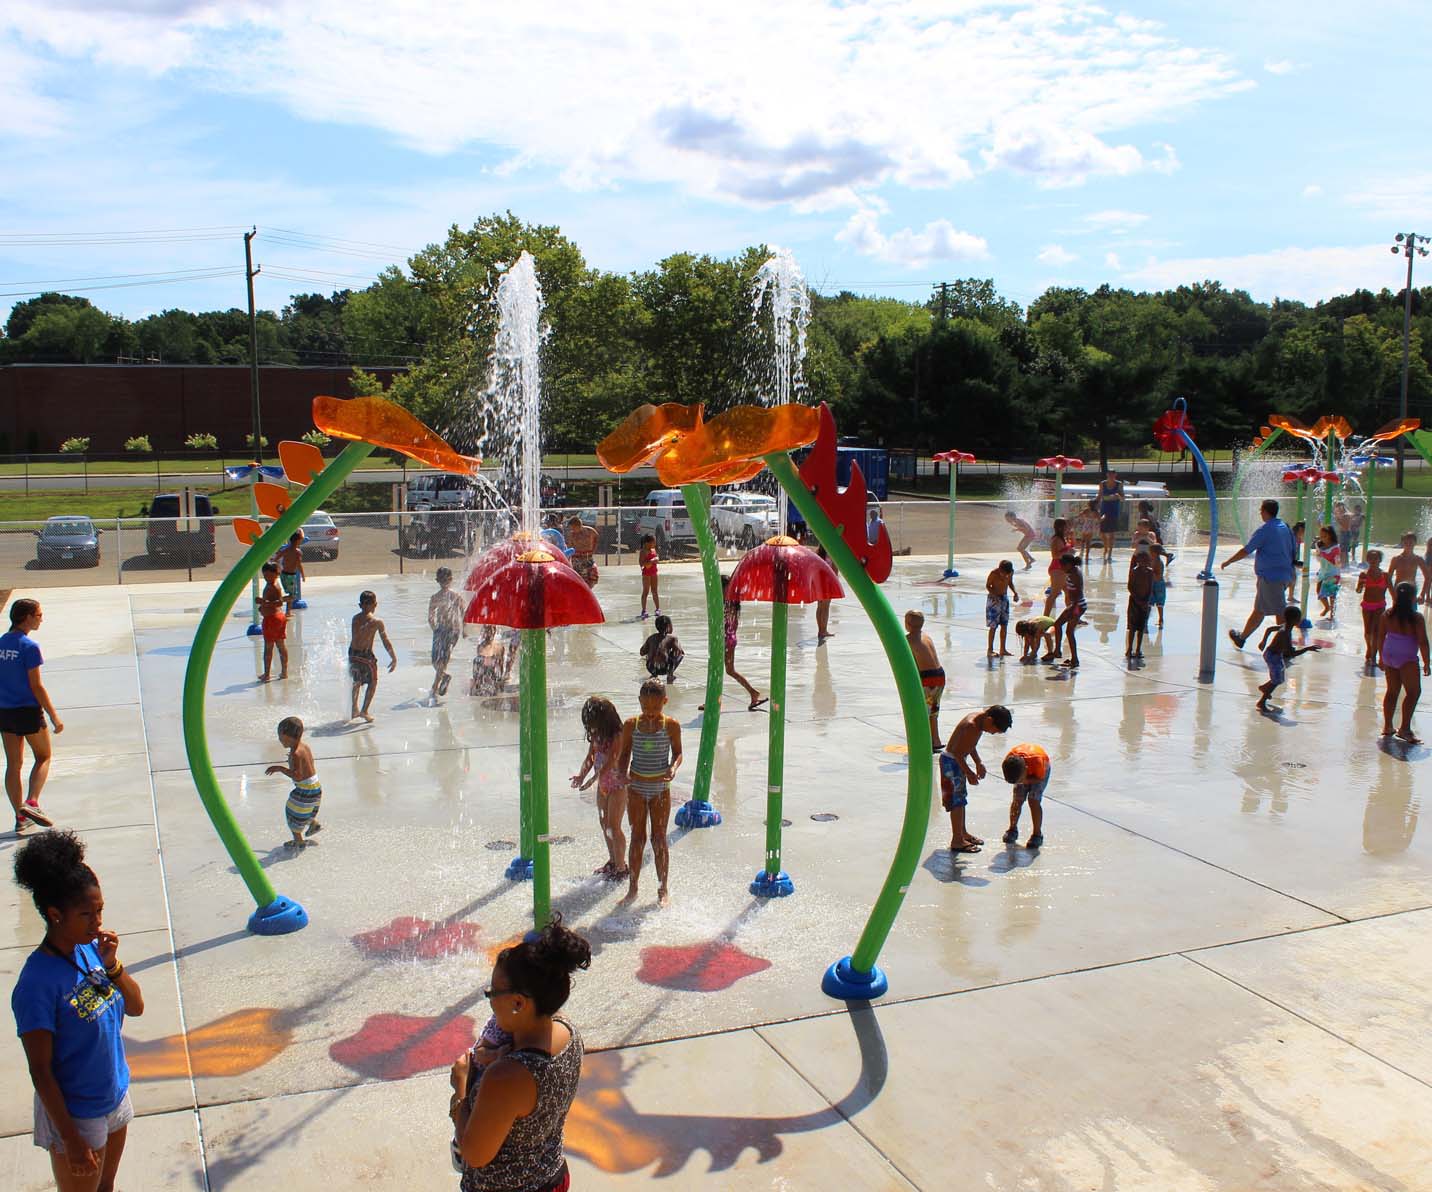 A.W. Stanley and Willow Brook Pools in New Britain to reopen final